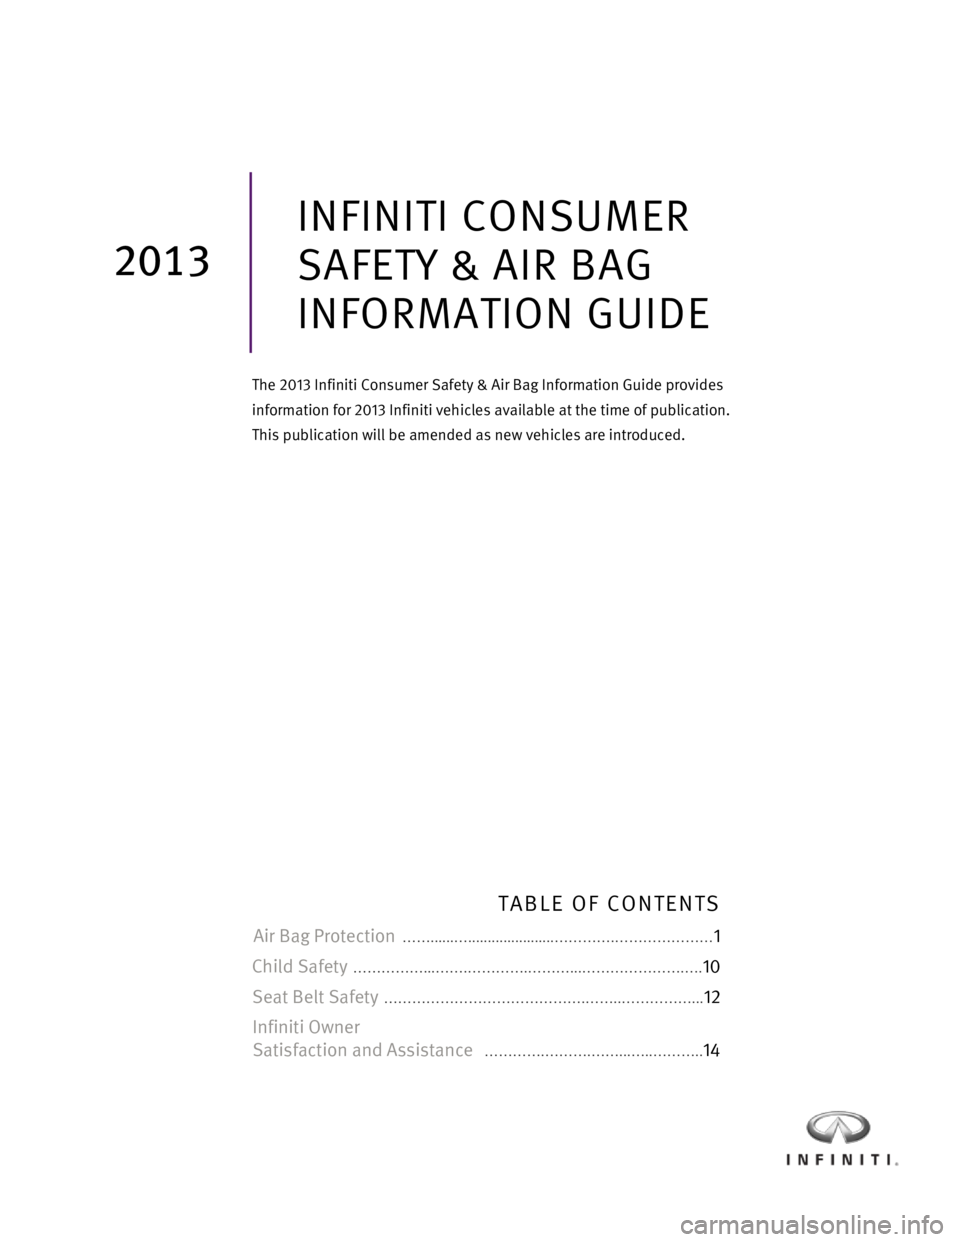 INFINITI M HYBRID 2013  Consumer Safety And Air Bag Information Guide 